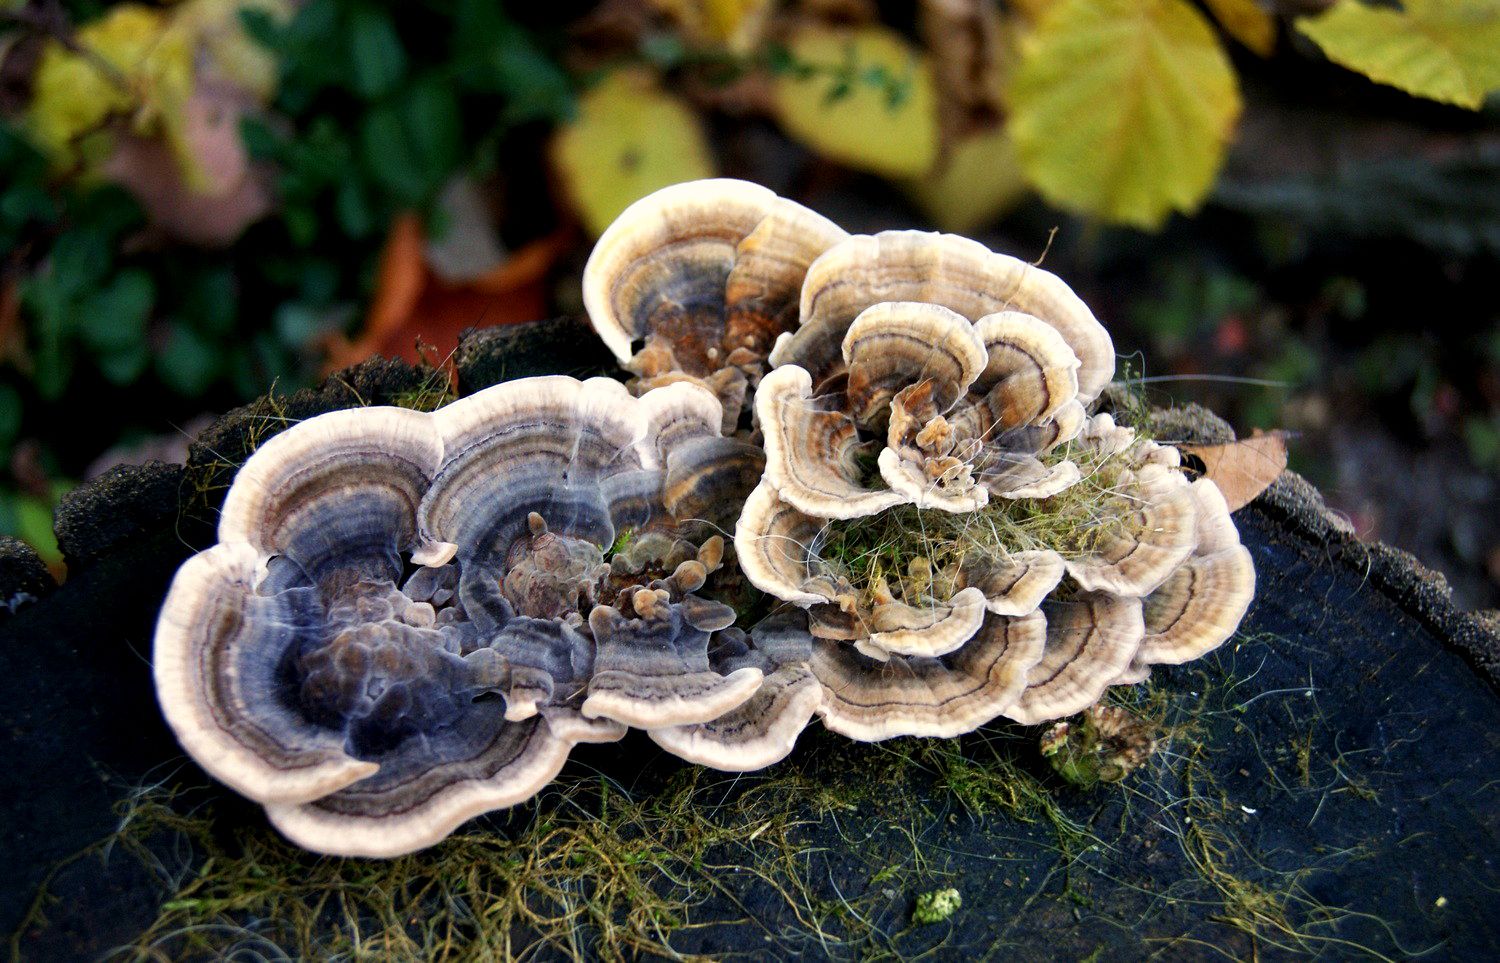 26.11, Even fungus can be beautiful